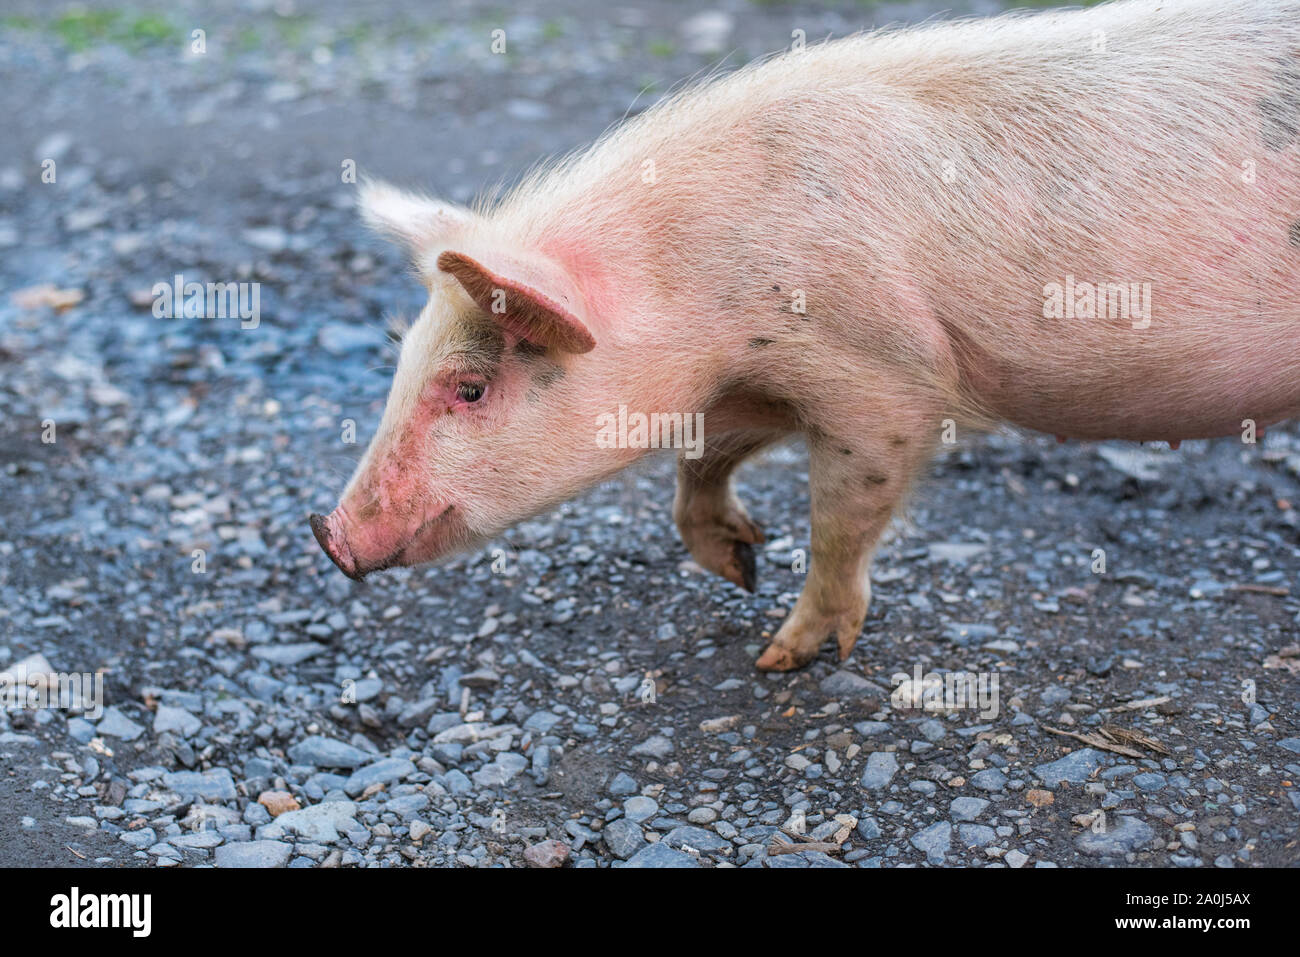 Lovely young pig freezes in uncertainty snuffing. Close-up Stock Photo